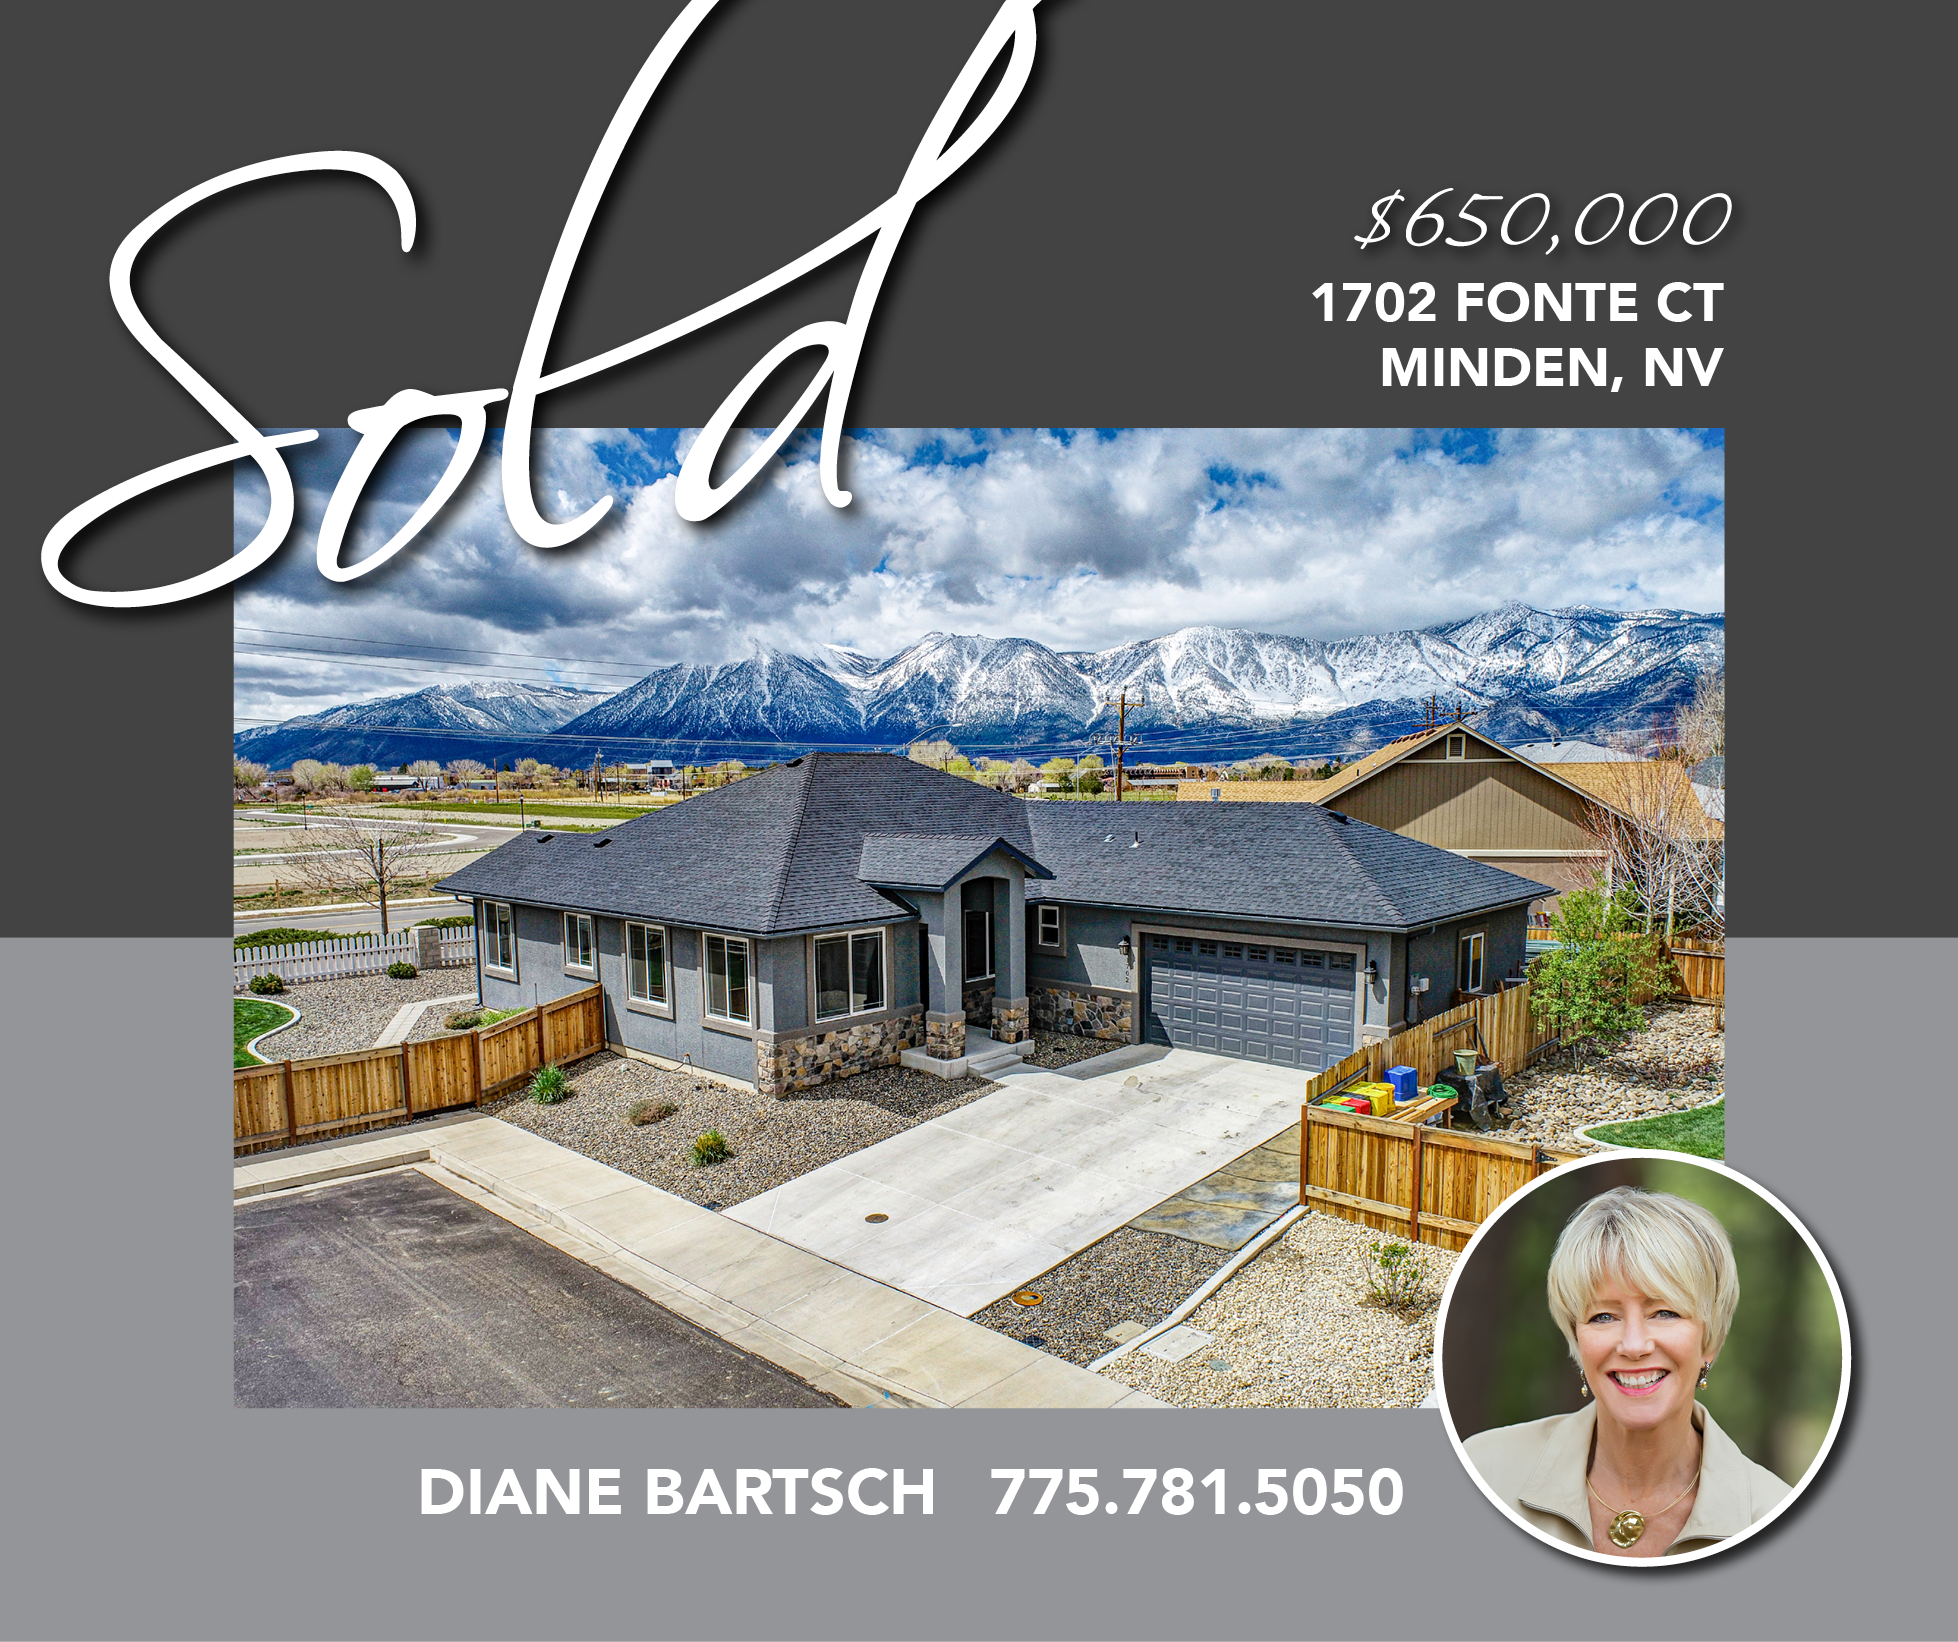 1702 Fonte Ct sold for $650,000